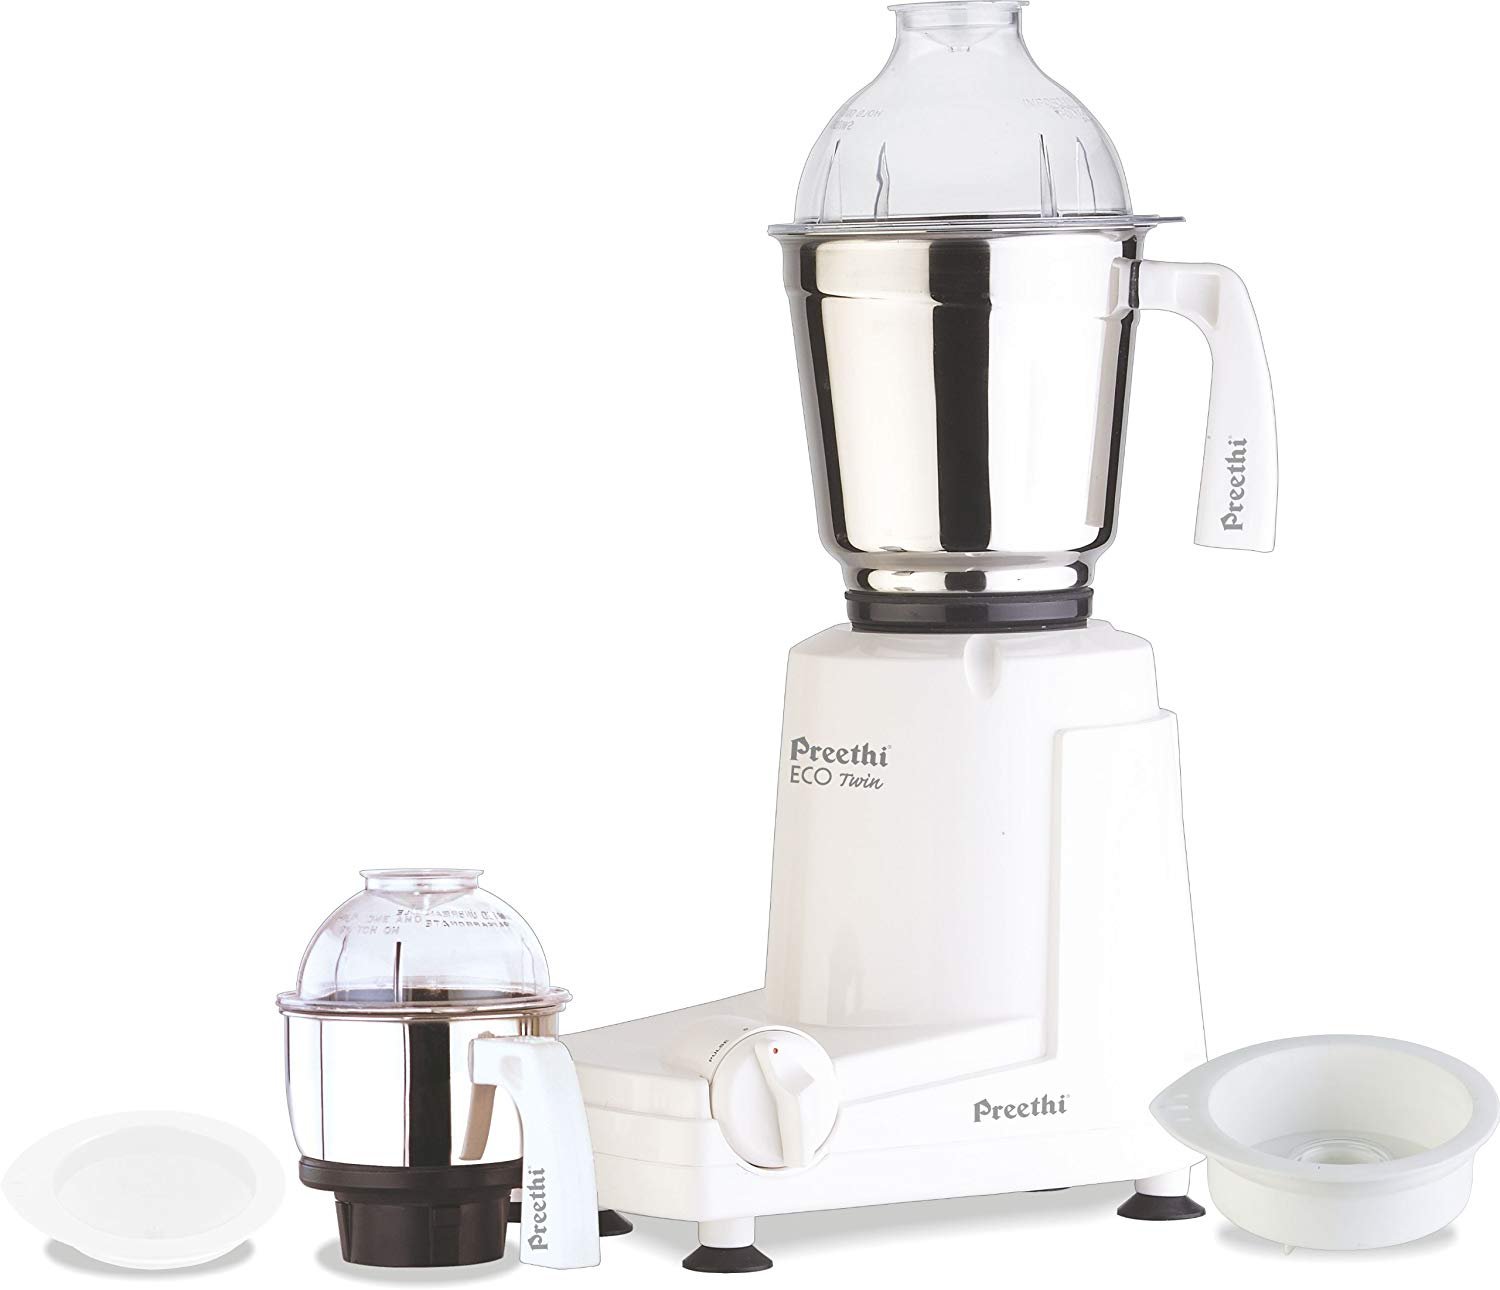 5-in-1 'Elegance' Wet and Dry Indian Mixer Grinder 1000W